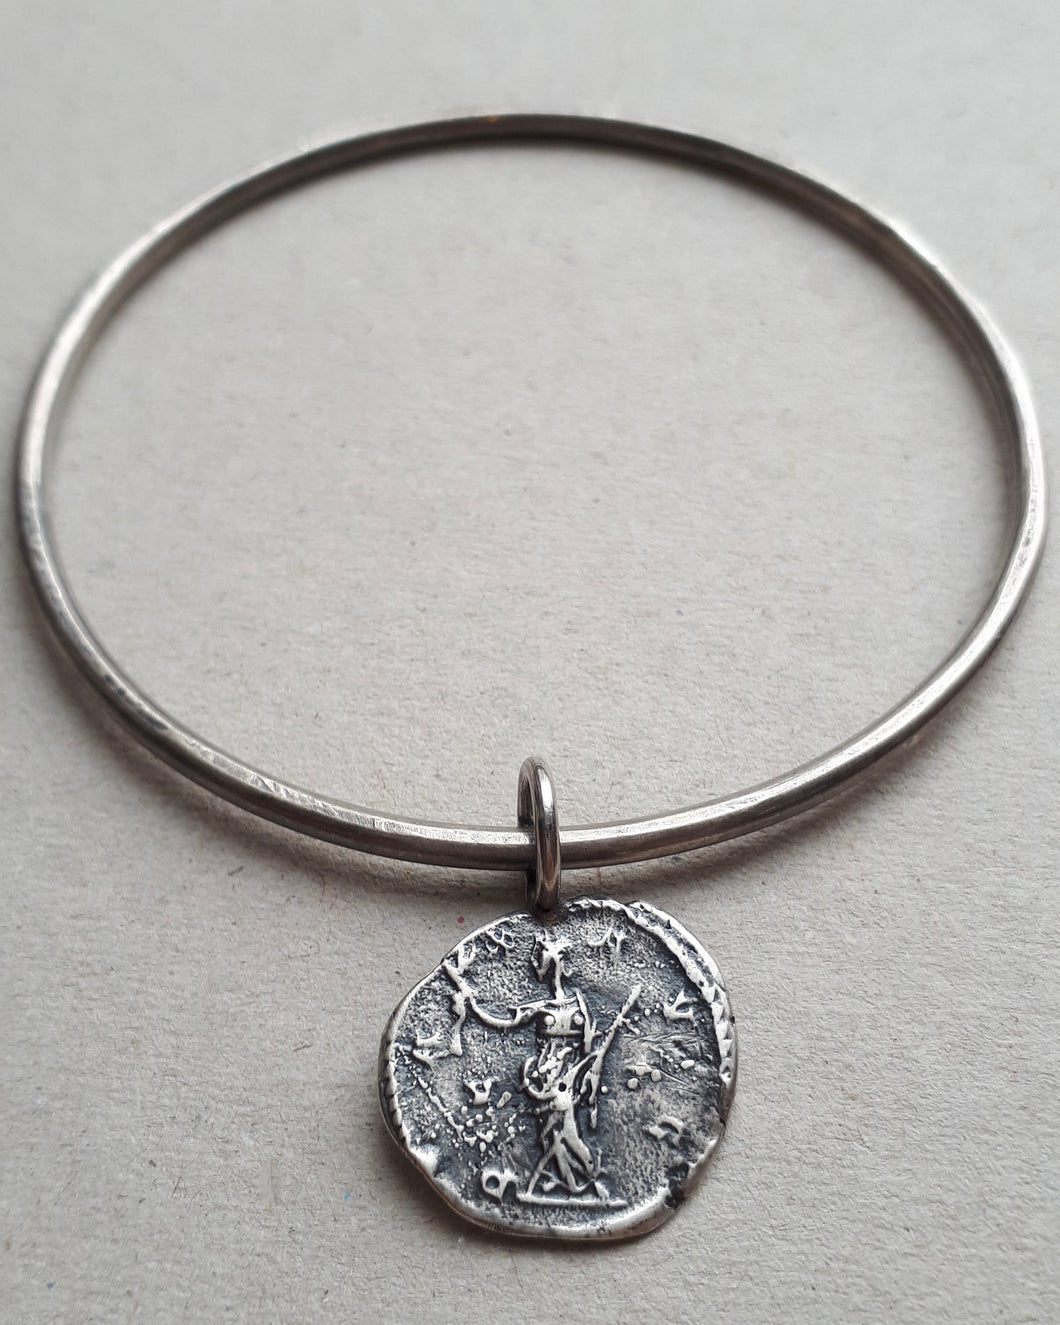 Oxidized sterling silver bangle featuring an ancient Roman coin Pax, the goddess of peace and harmony.